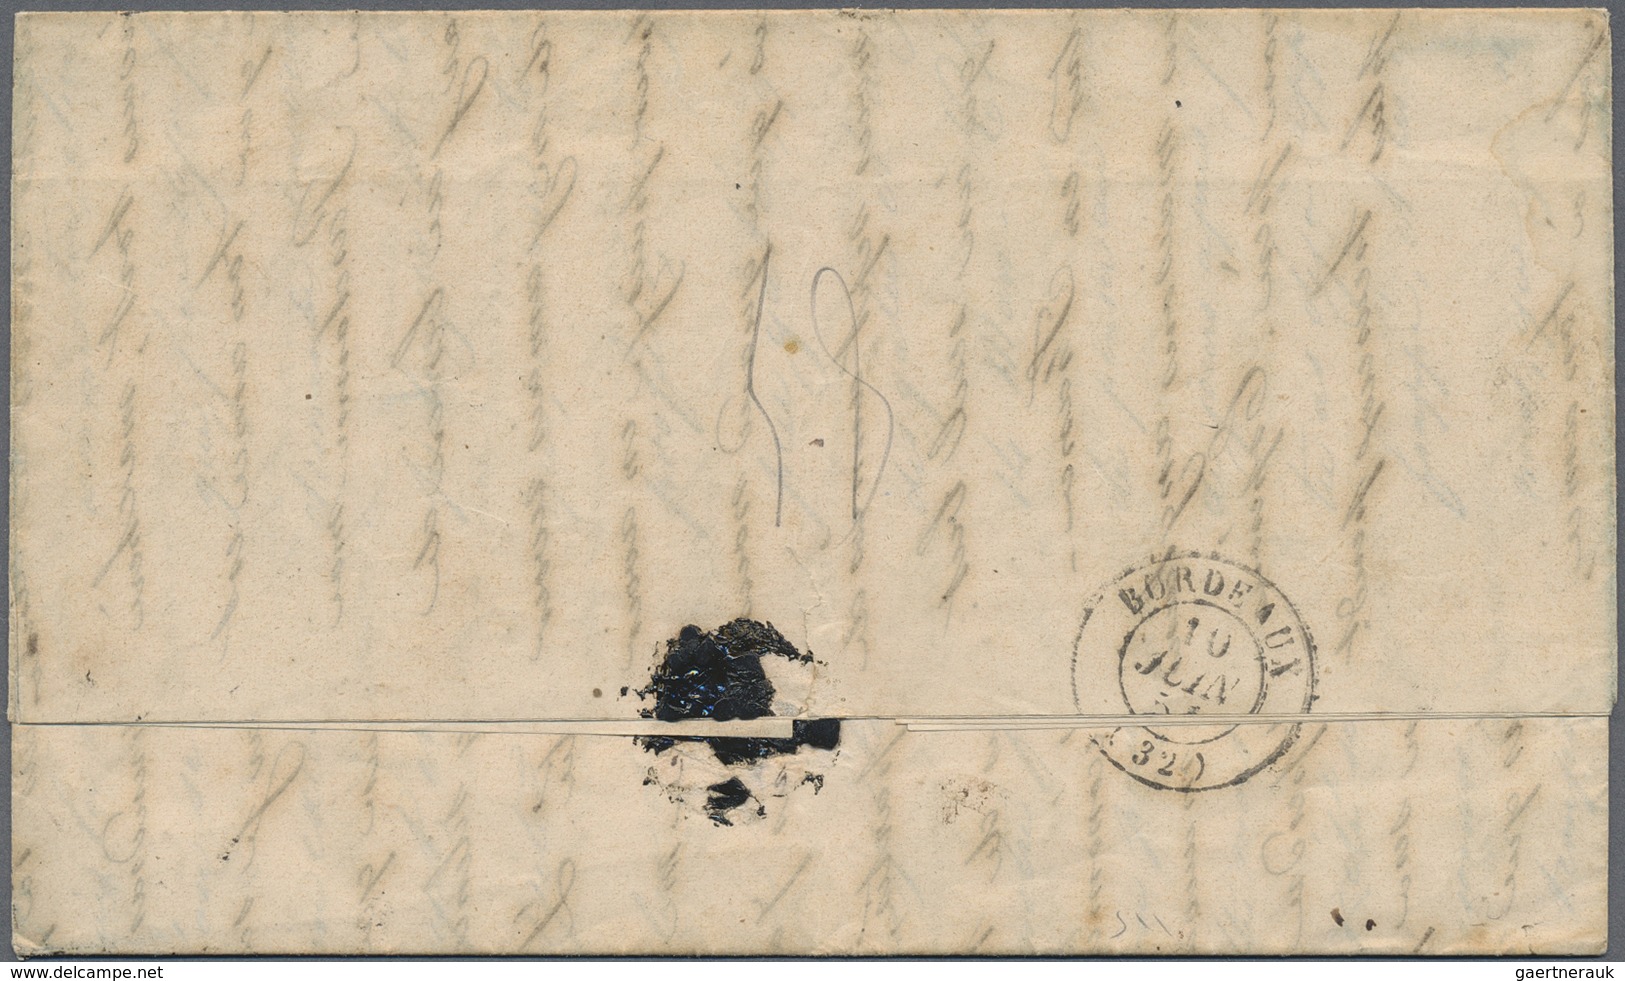 Br Mauritius: 1851. Stampless Envelope To France Written From Port Louis Cancelled By 'Crown/Mauritiul - Mauritius (...-1967)